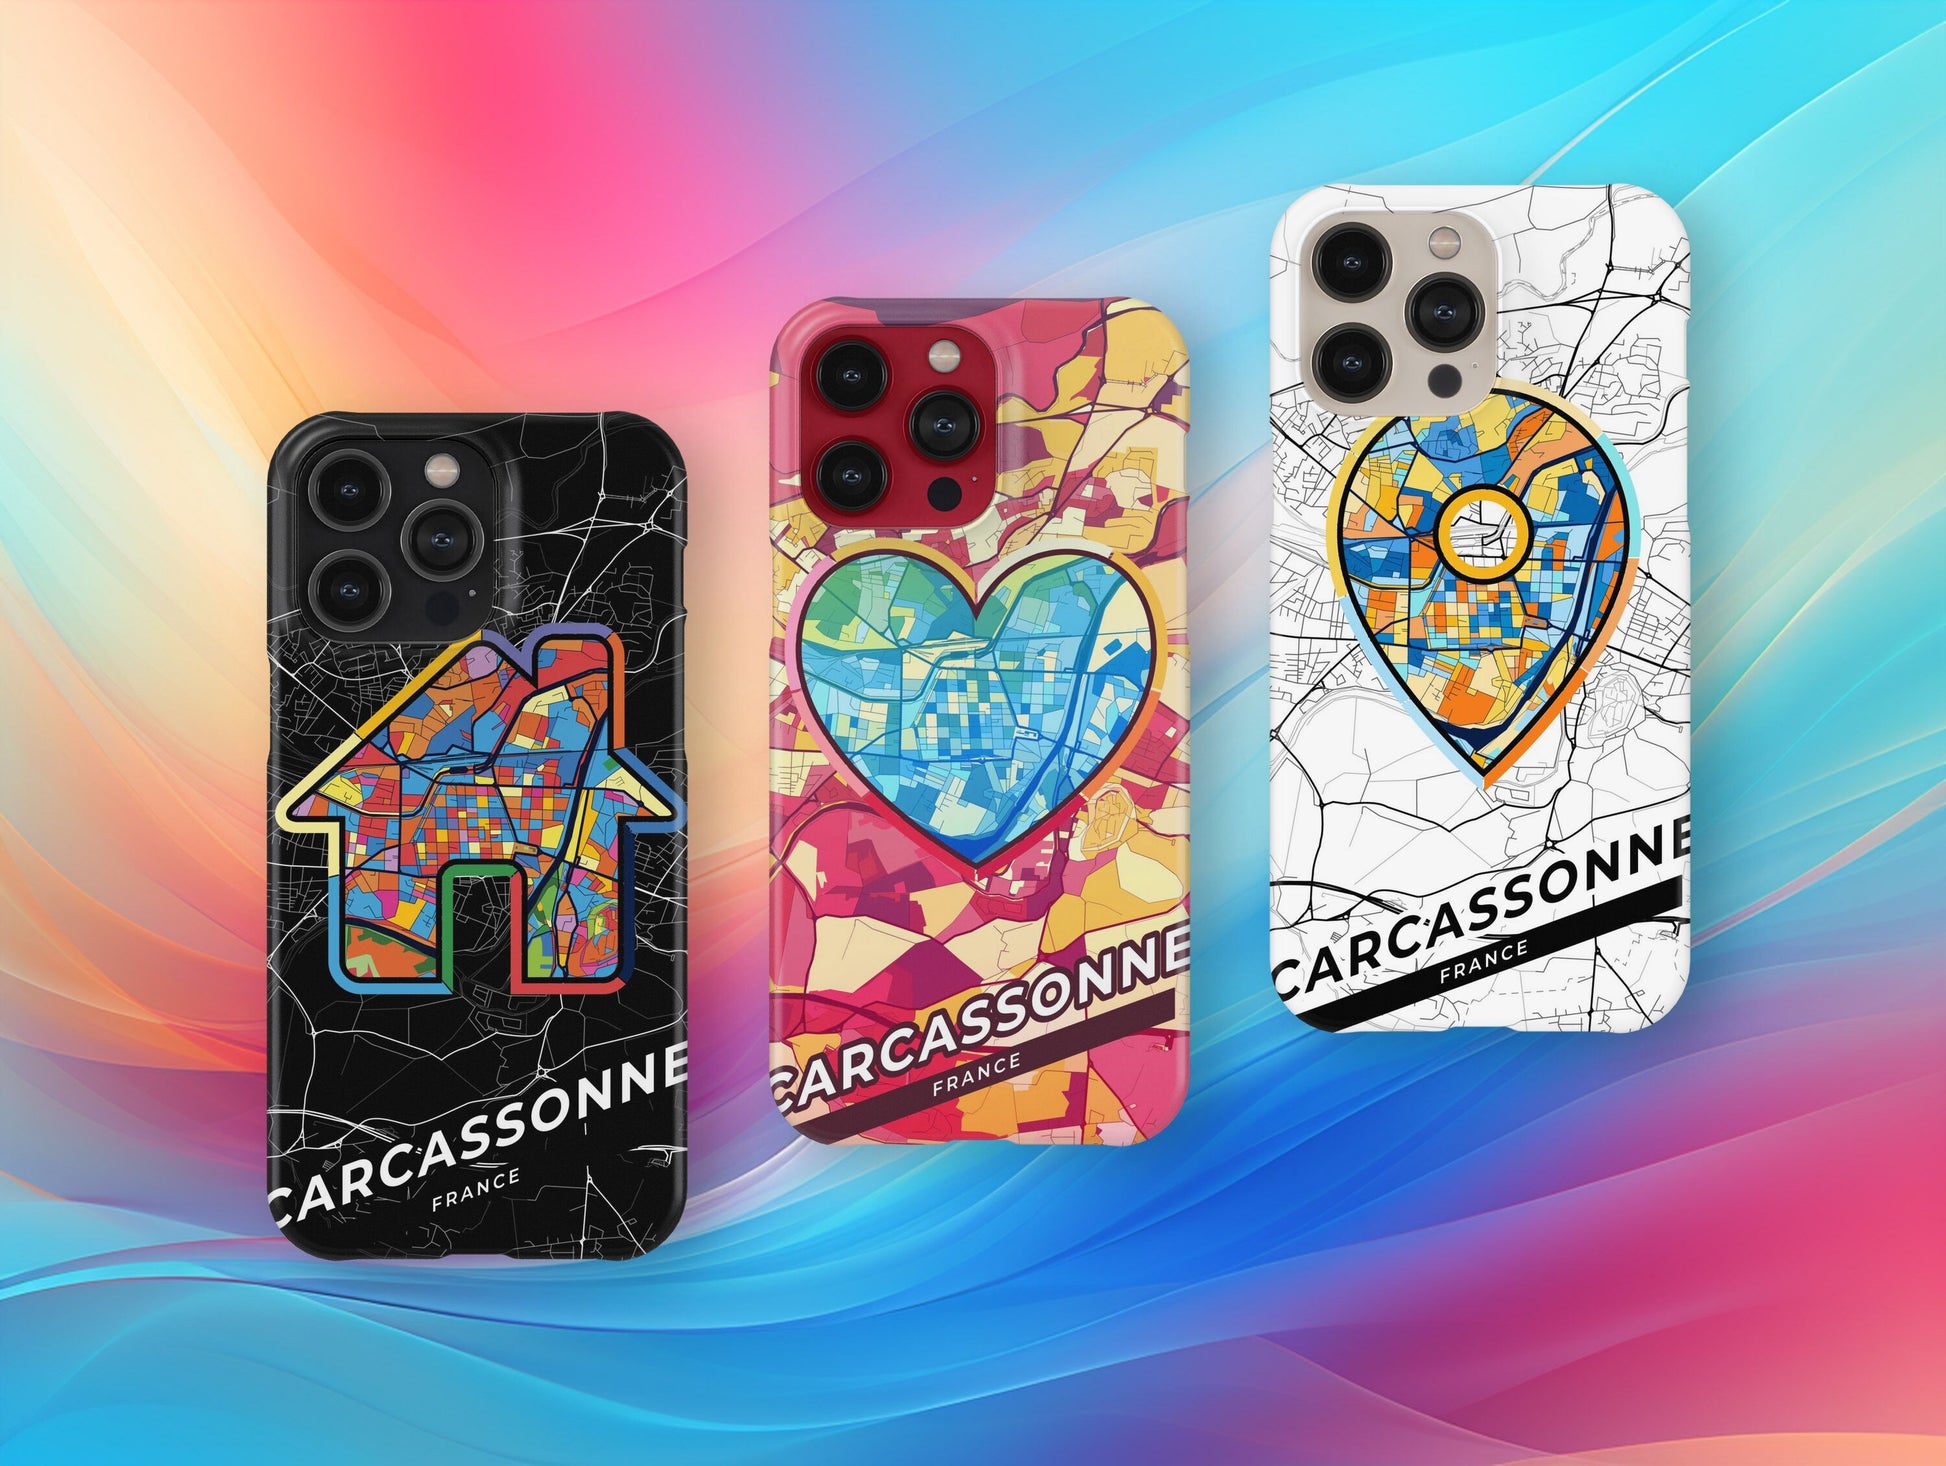 Carcassonne France slim phone case with colorful icon. Birthday, wedding or housewarming gift. Couple match cases.